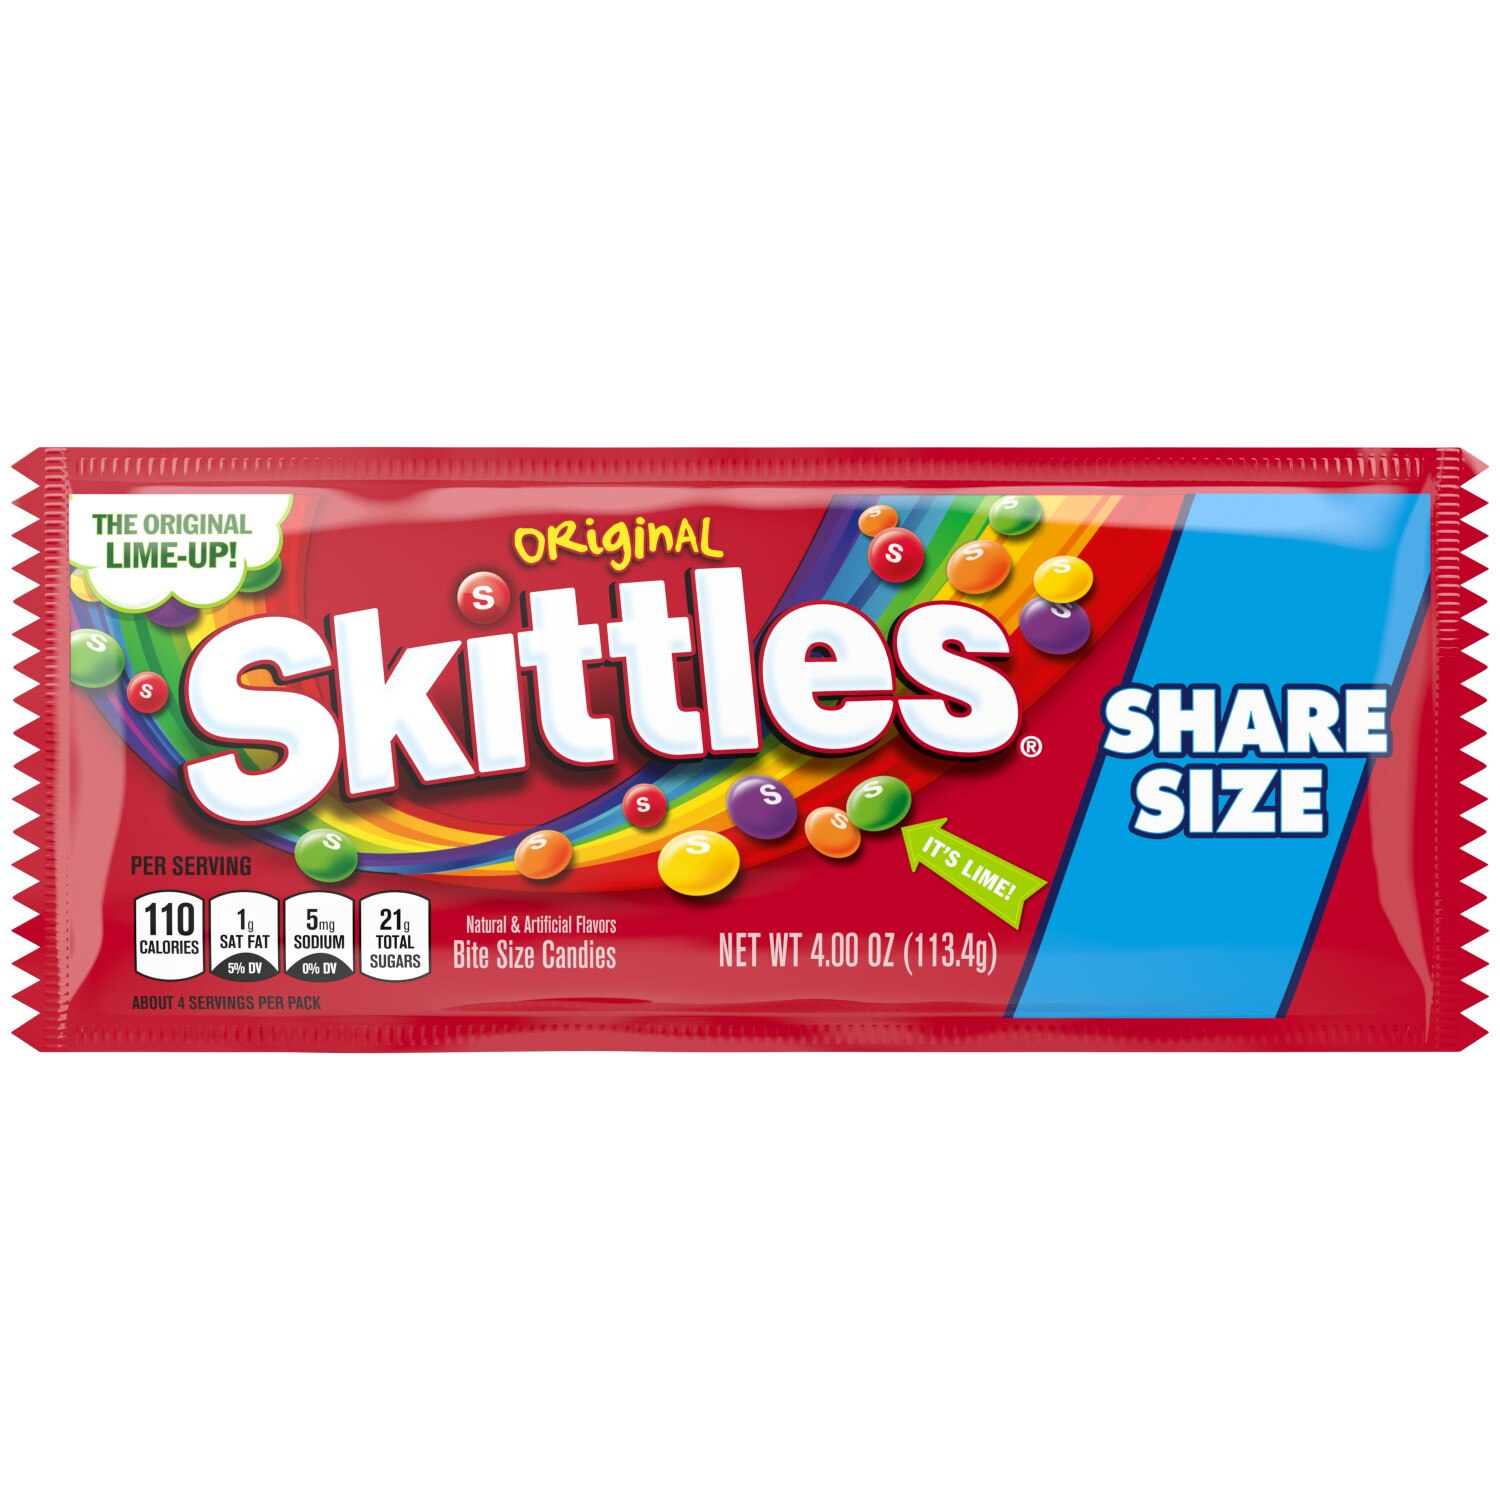 SKITTLES Original Chewy Candy, Share Size, 4 oz Bag